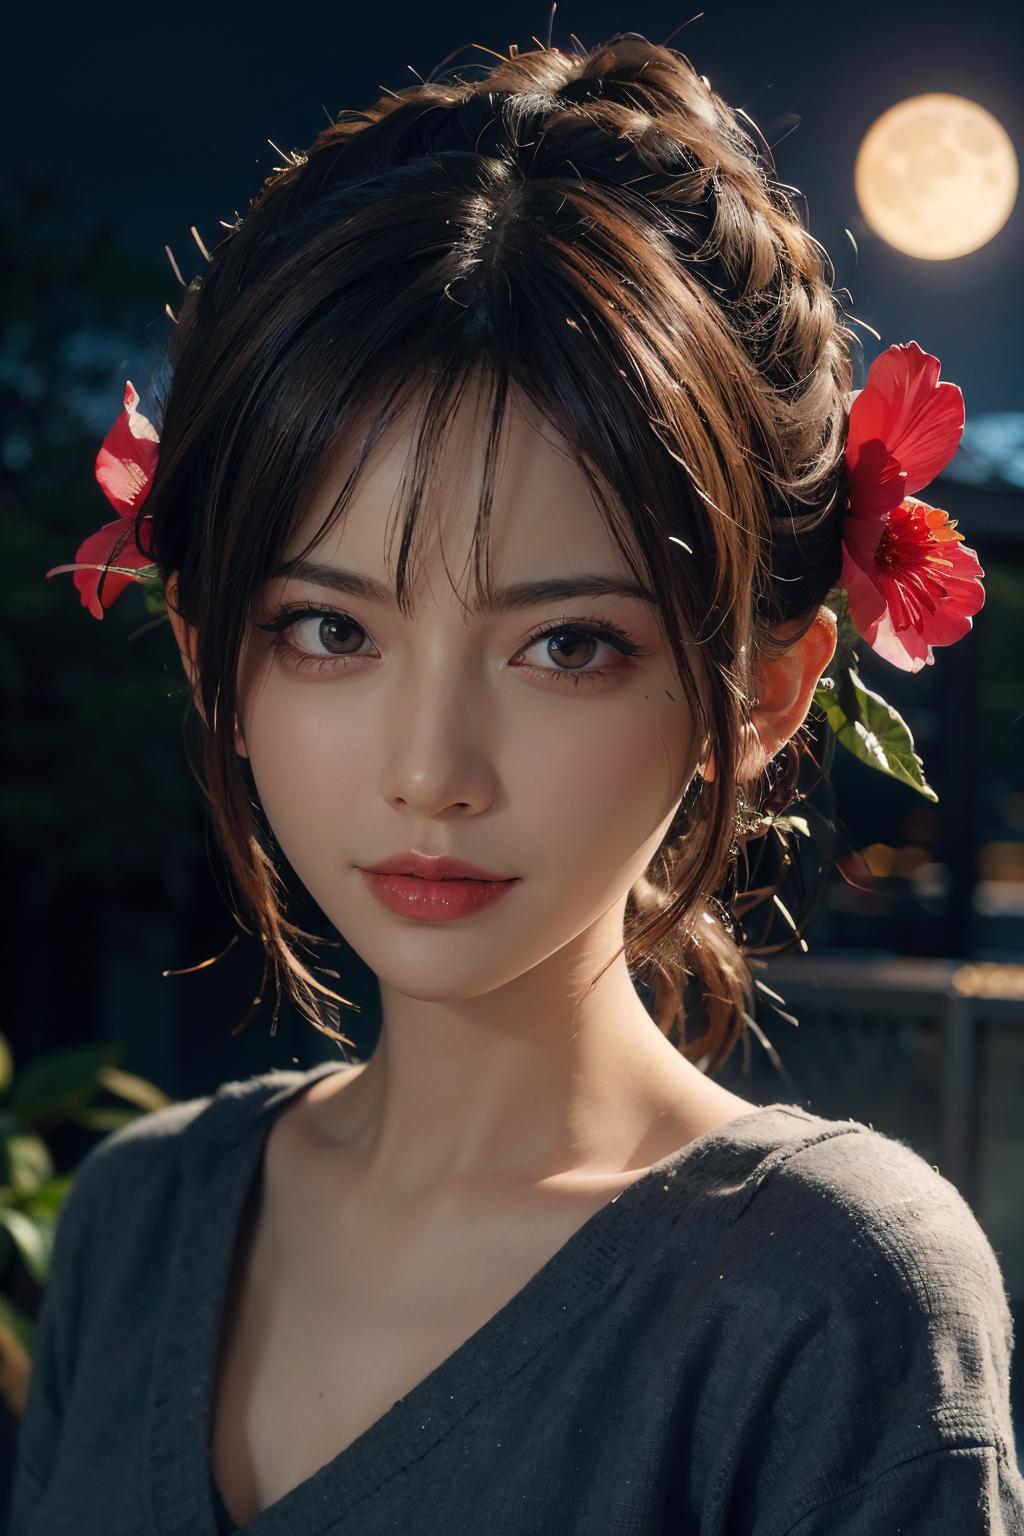 A woman with brown hair and a red flower in it.